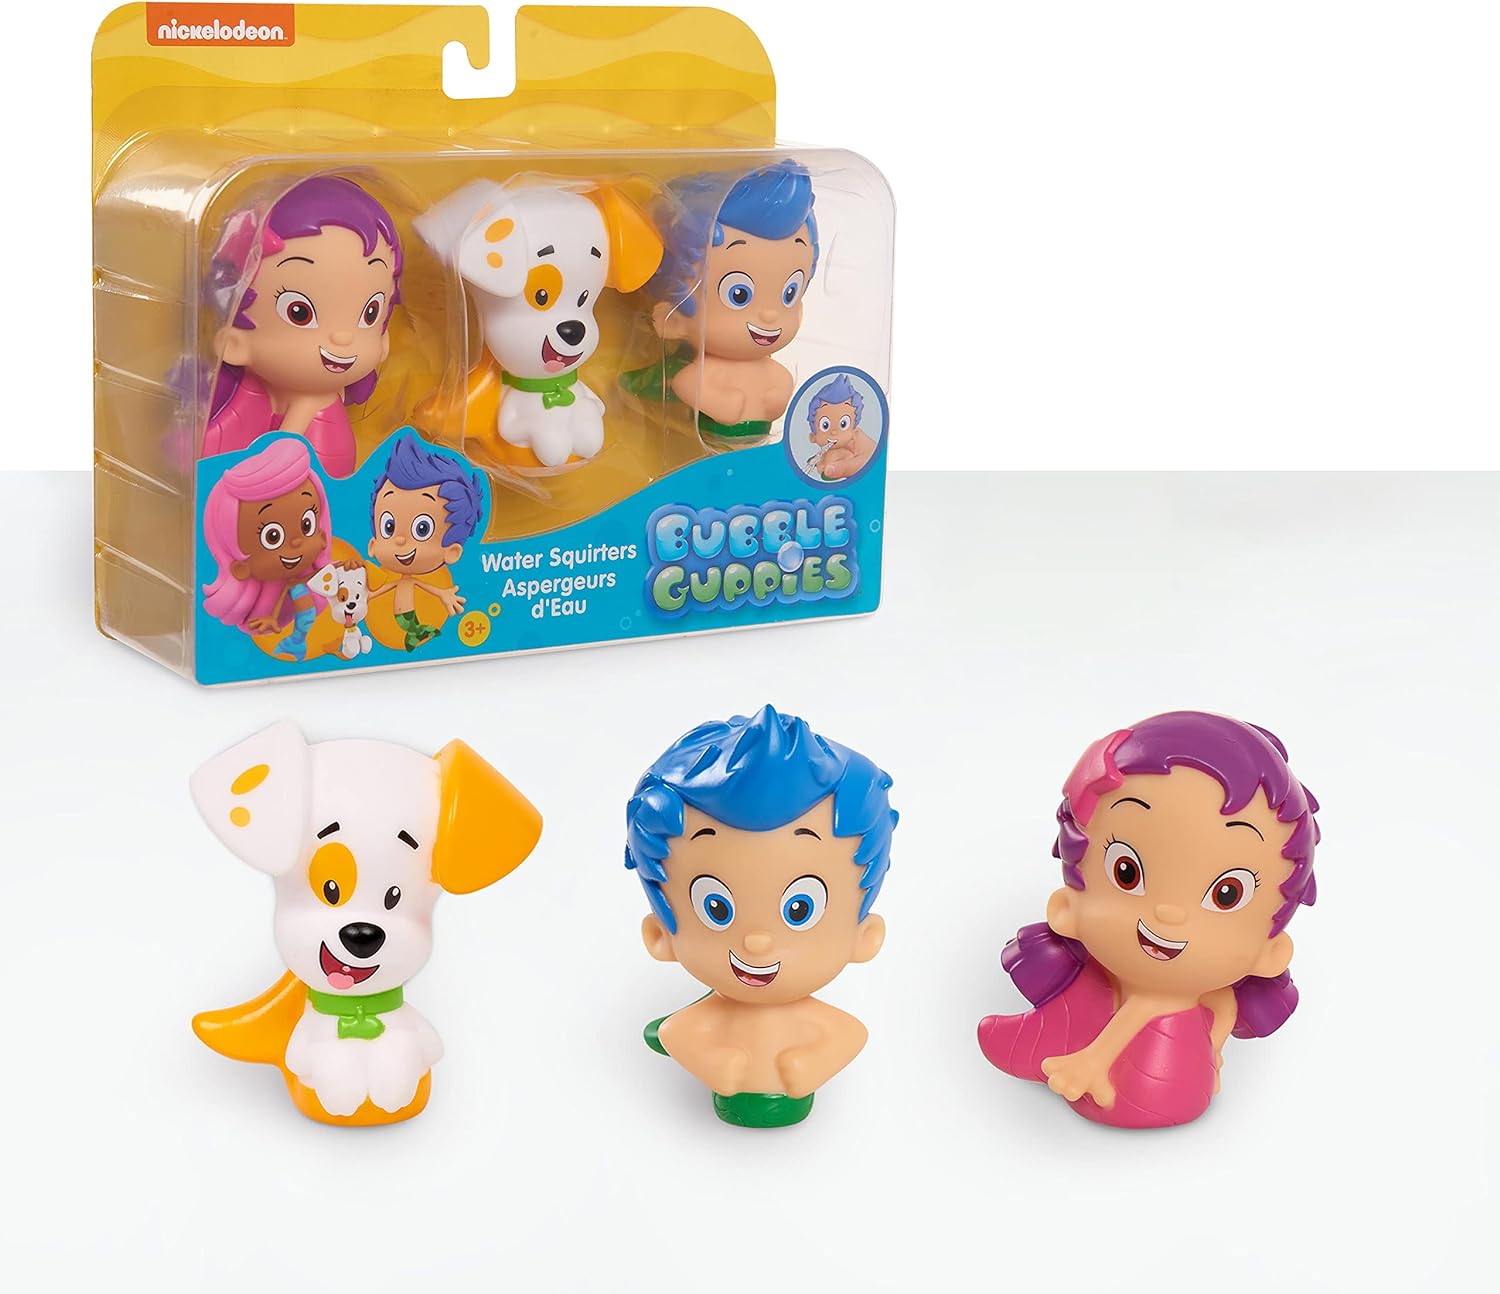 Can Bubble Guppies Water Toys Entertain Your Child For Hours. The Best Bathing Time Buddies Revealed